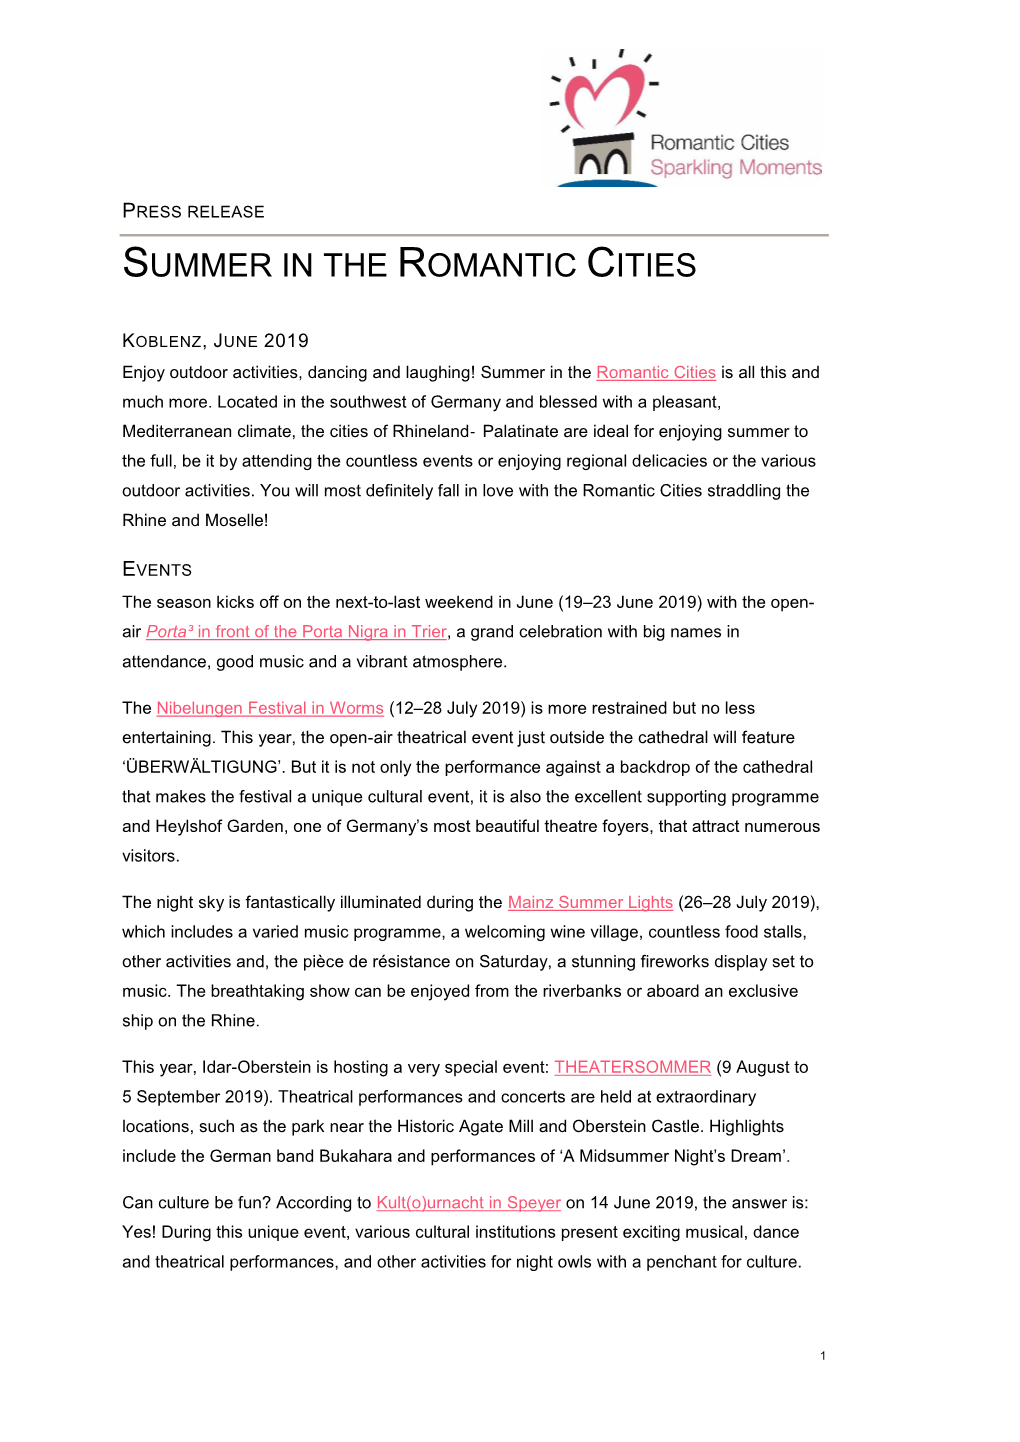 Summer in the Romantic Cities